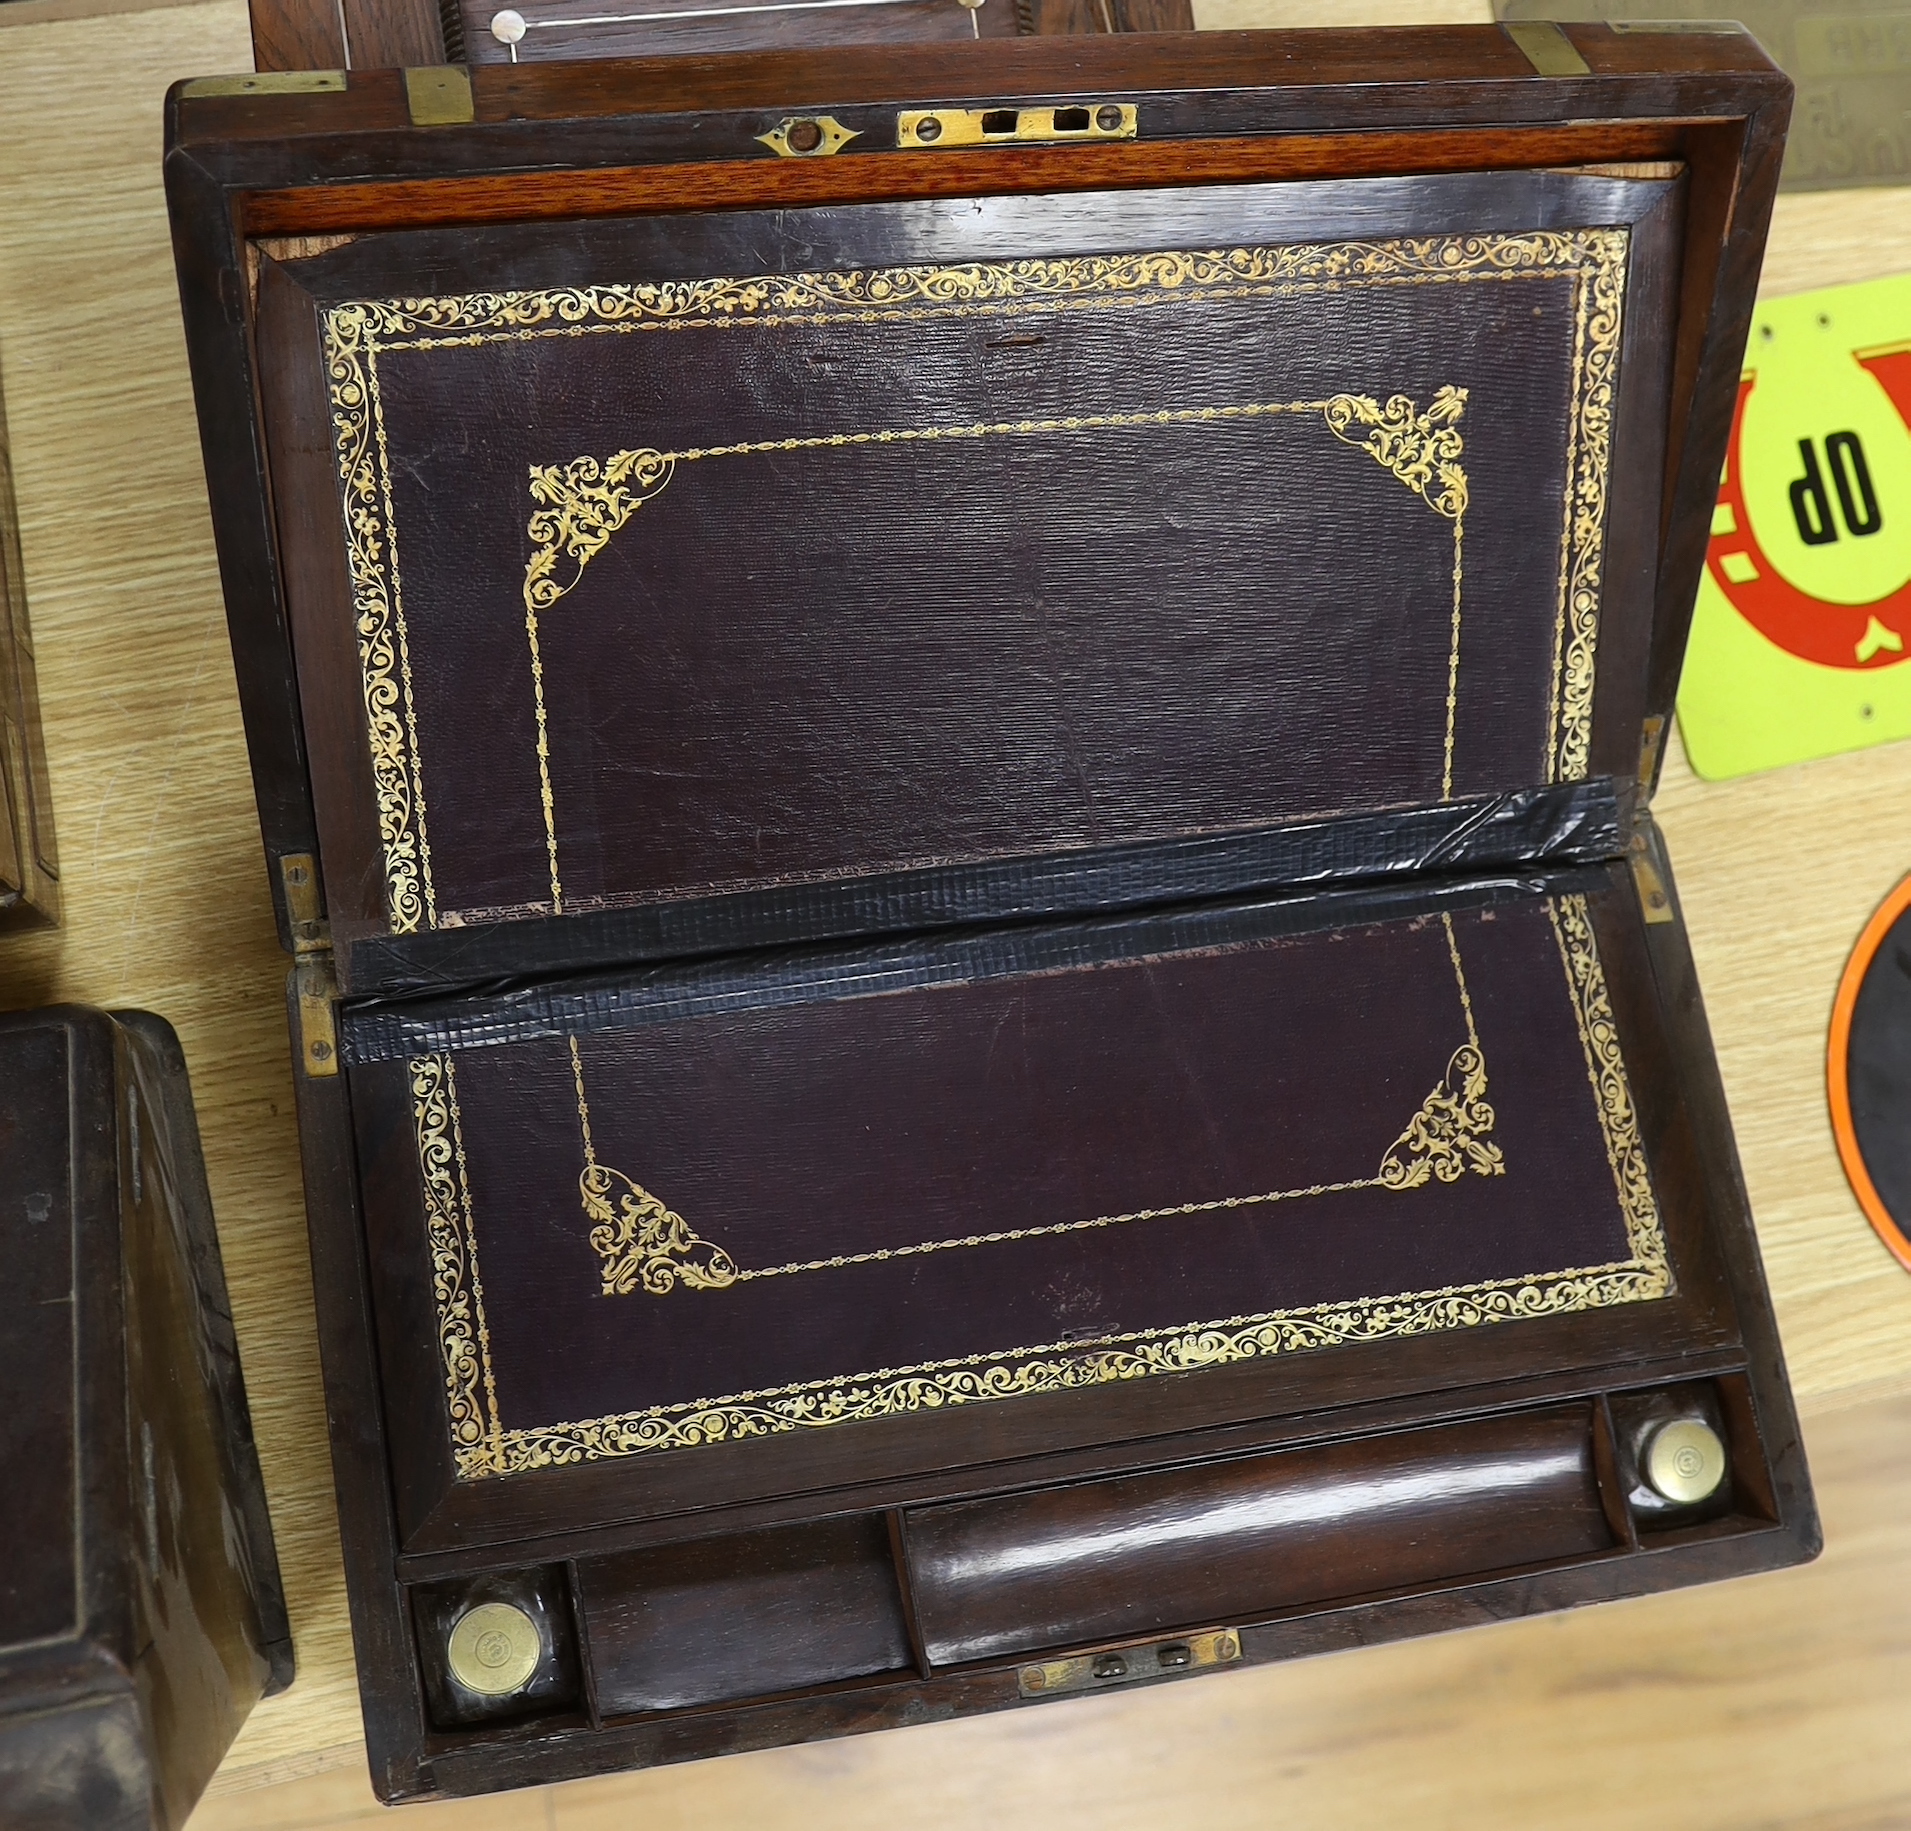 Two 19th century brass mounted writing slopes, a stationery cabinet and a work box